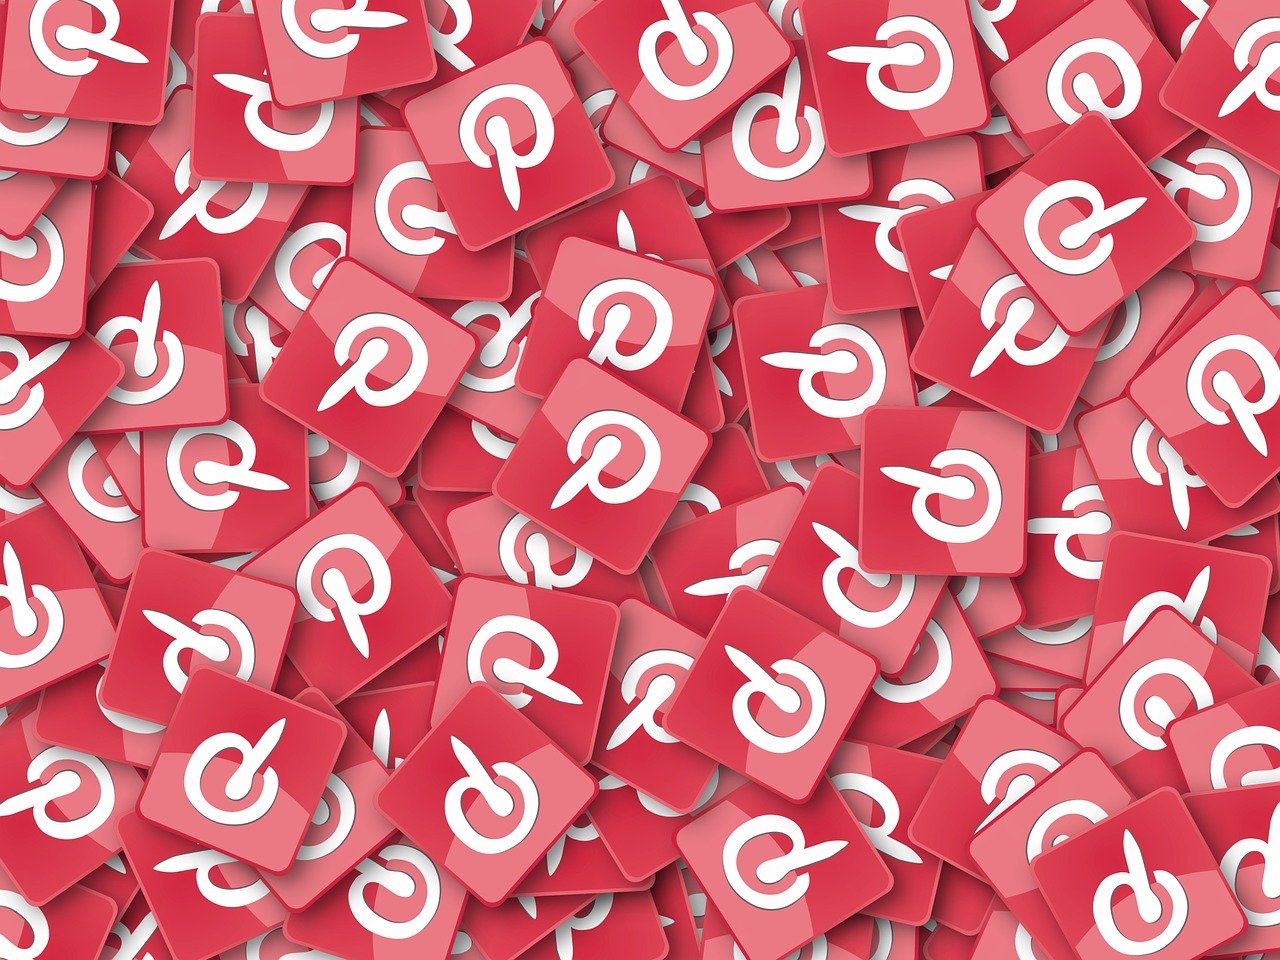 A large number of pinterest logo icons scattered across the frame depicting the ultimate pinterest strategy for affiliate marketers